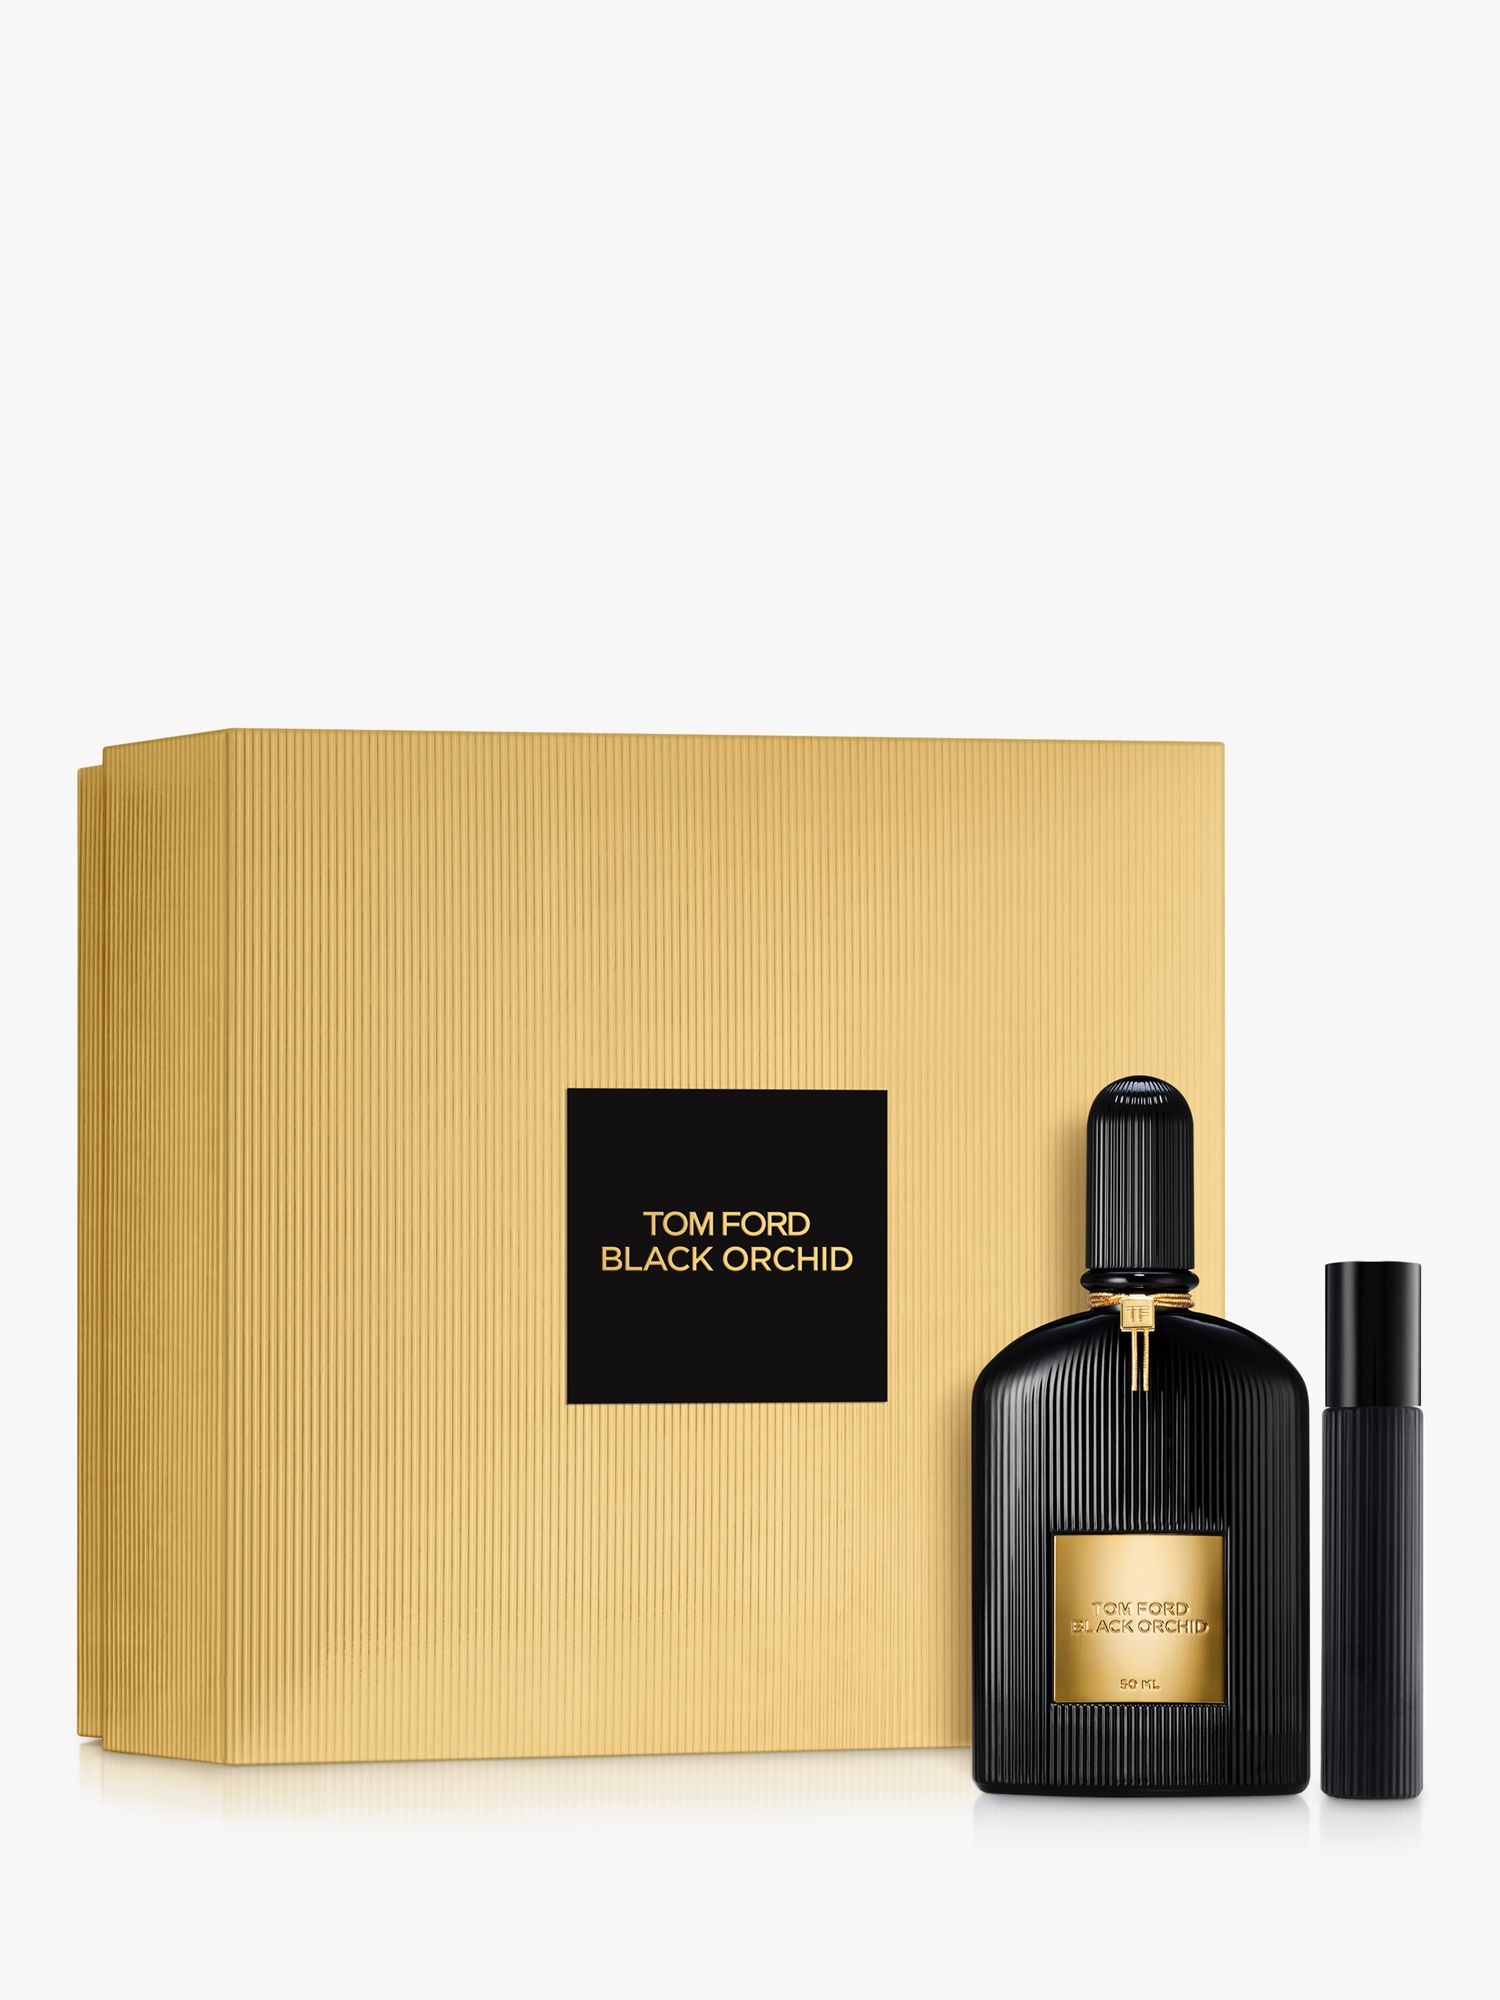 Tom Ford Discovery set - TV, Oud Wood, Tuscan Leather